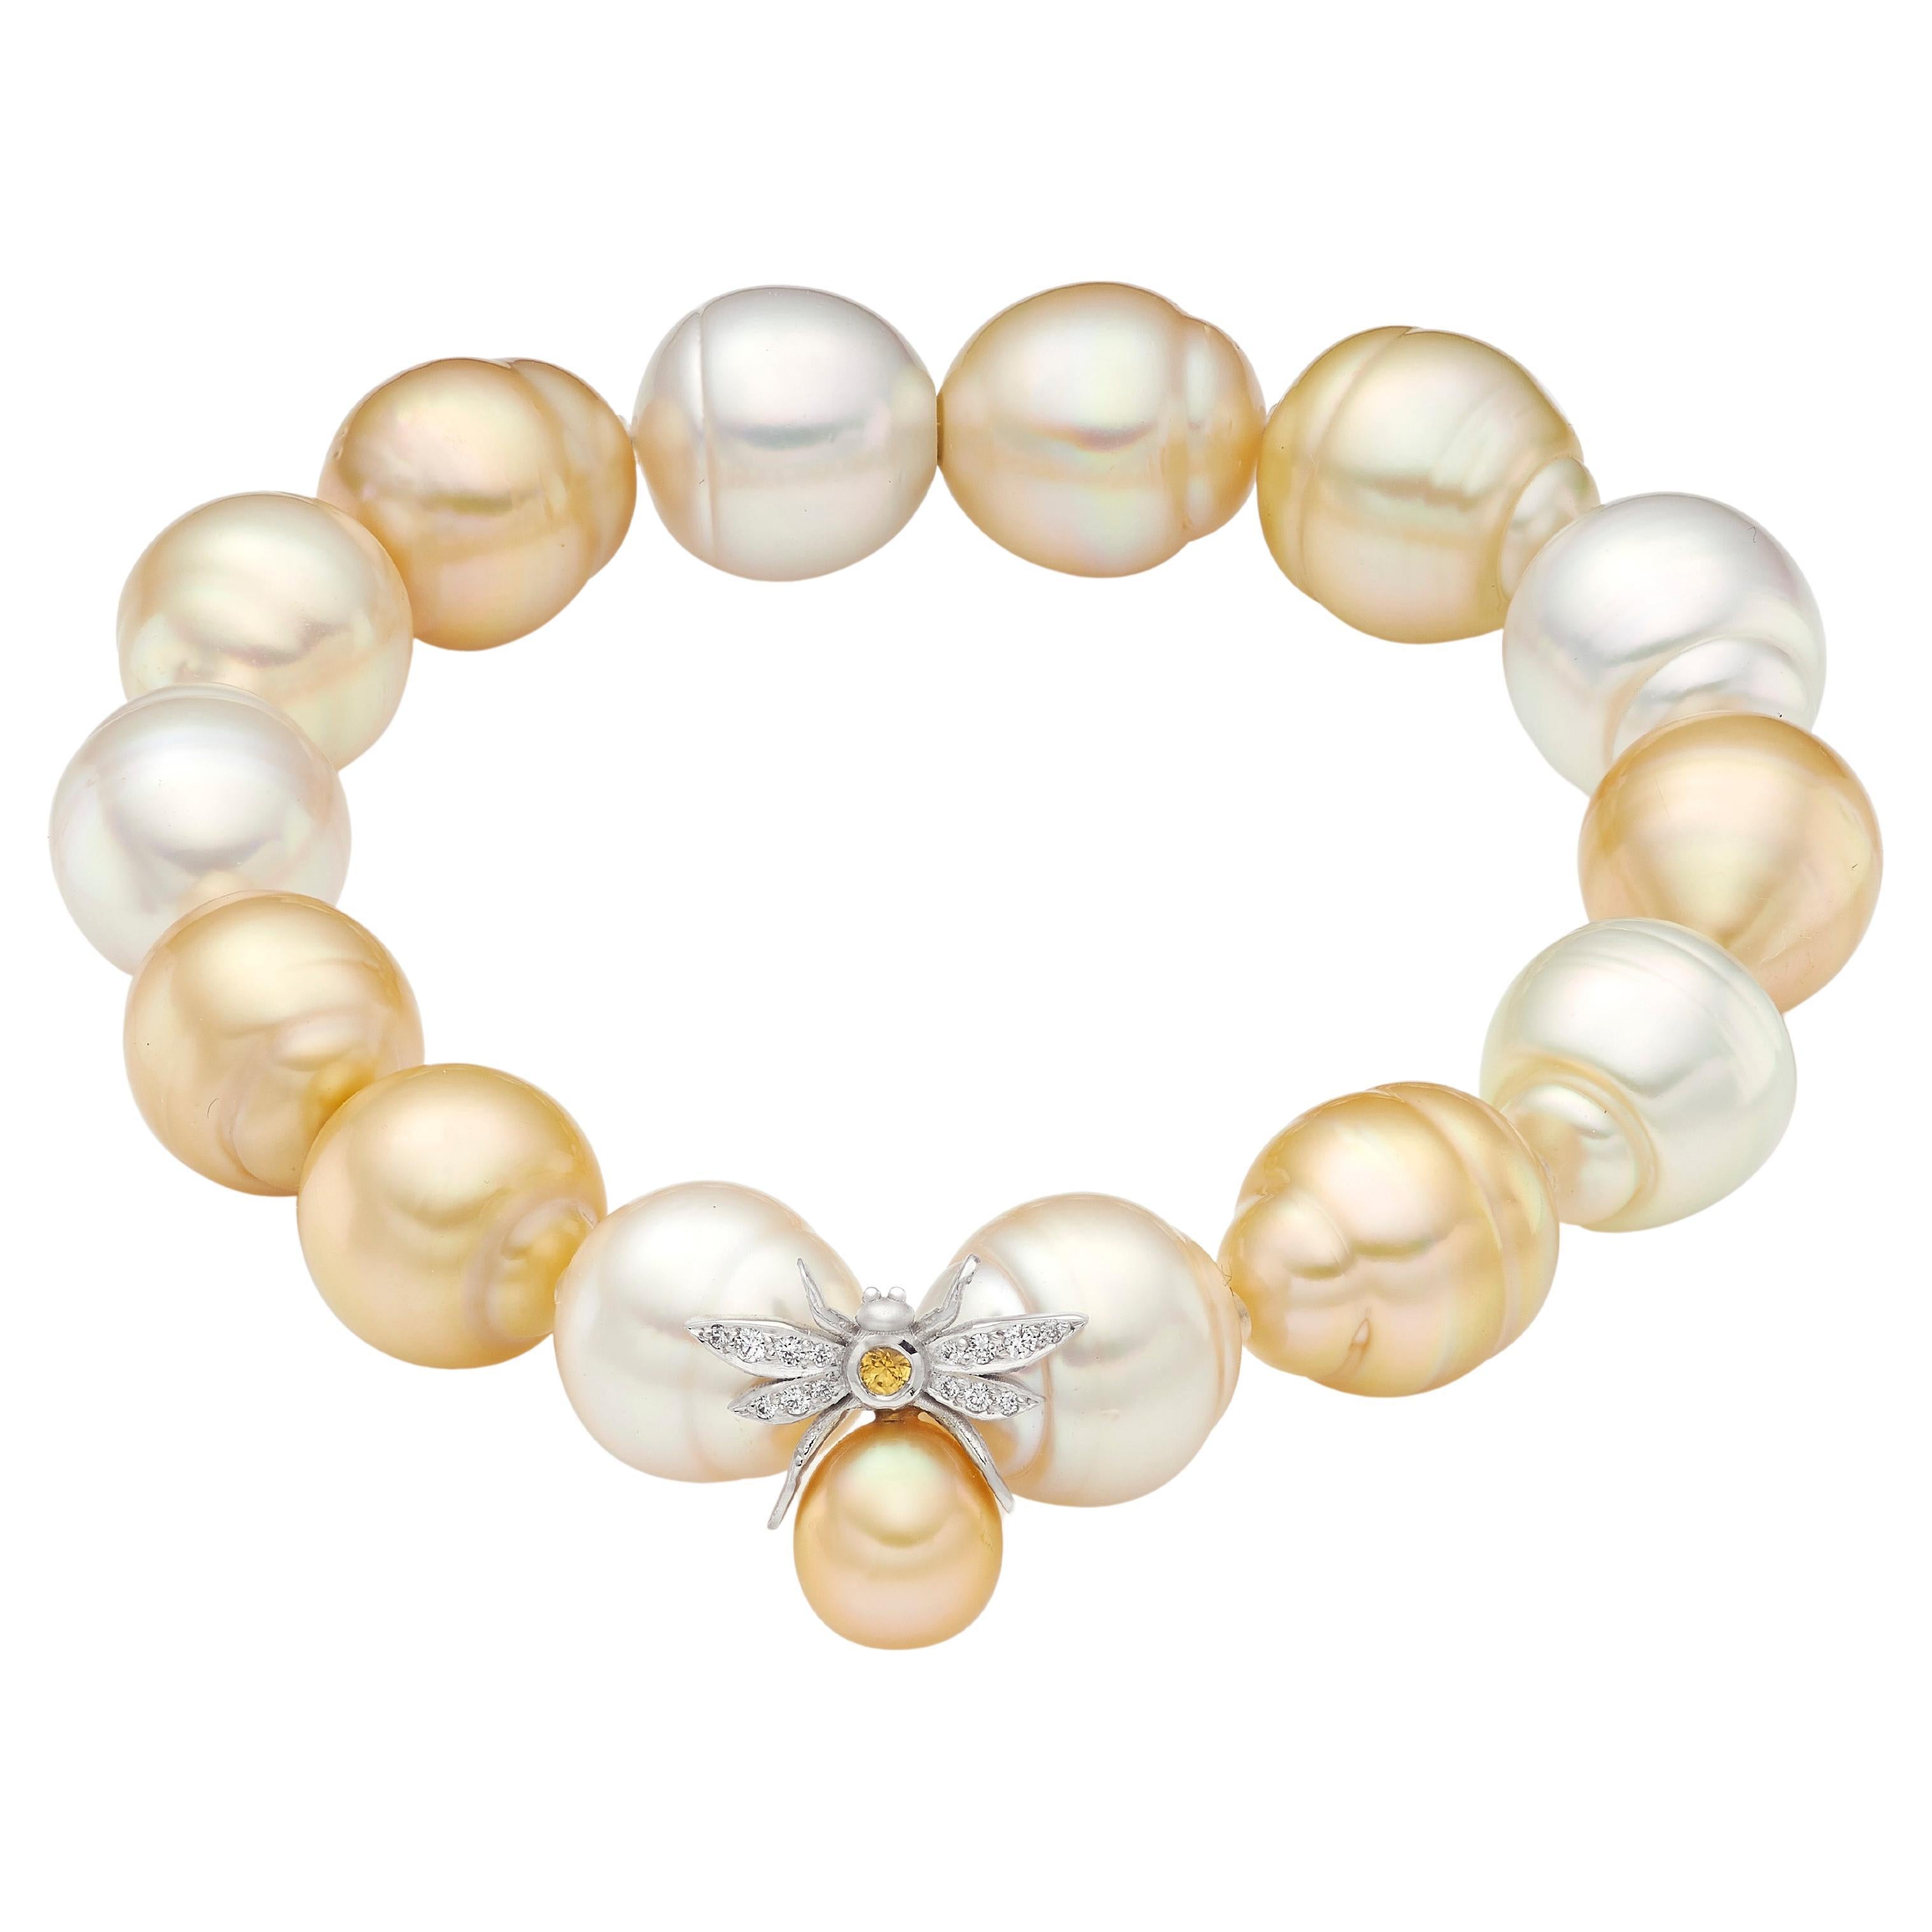 Lilly Hastedt Diamond and South Sea Pearl Insect Bracelet